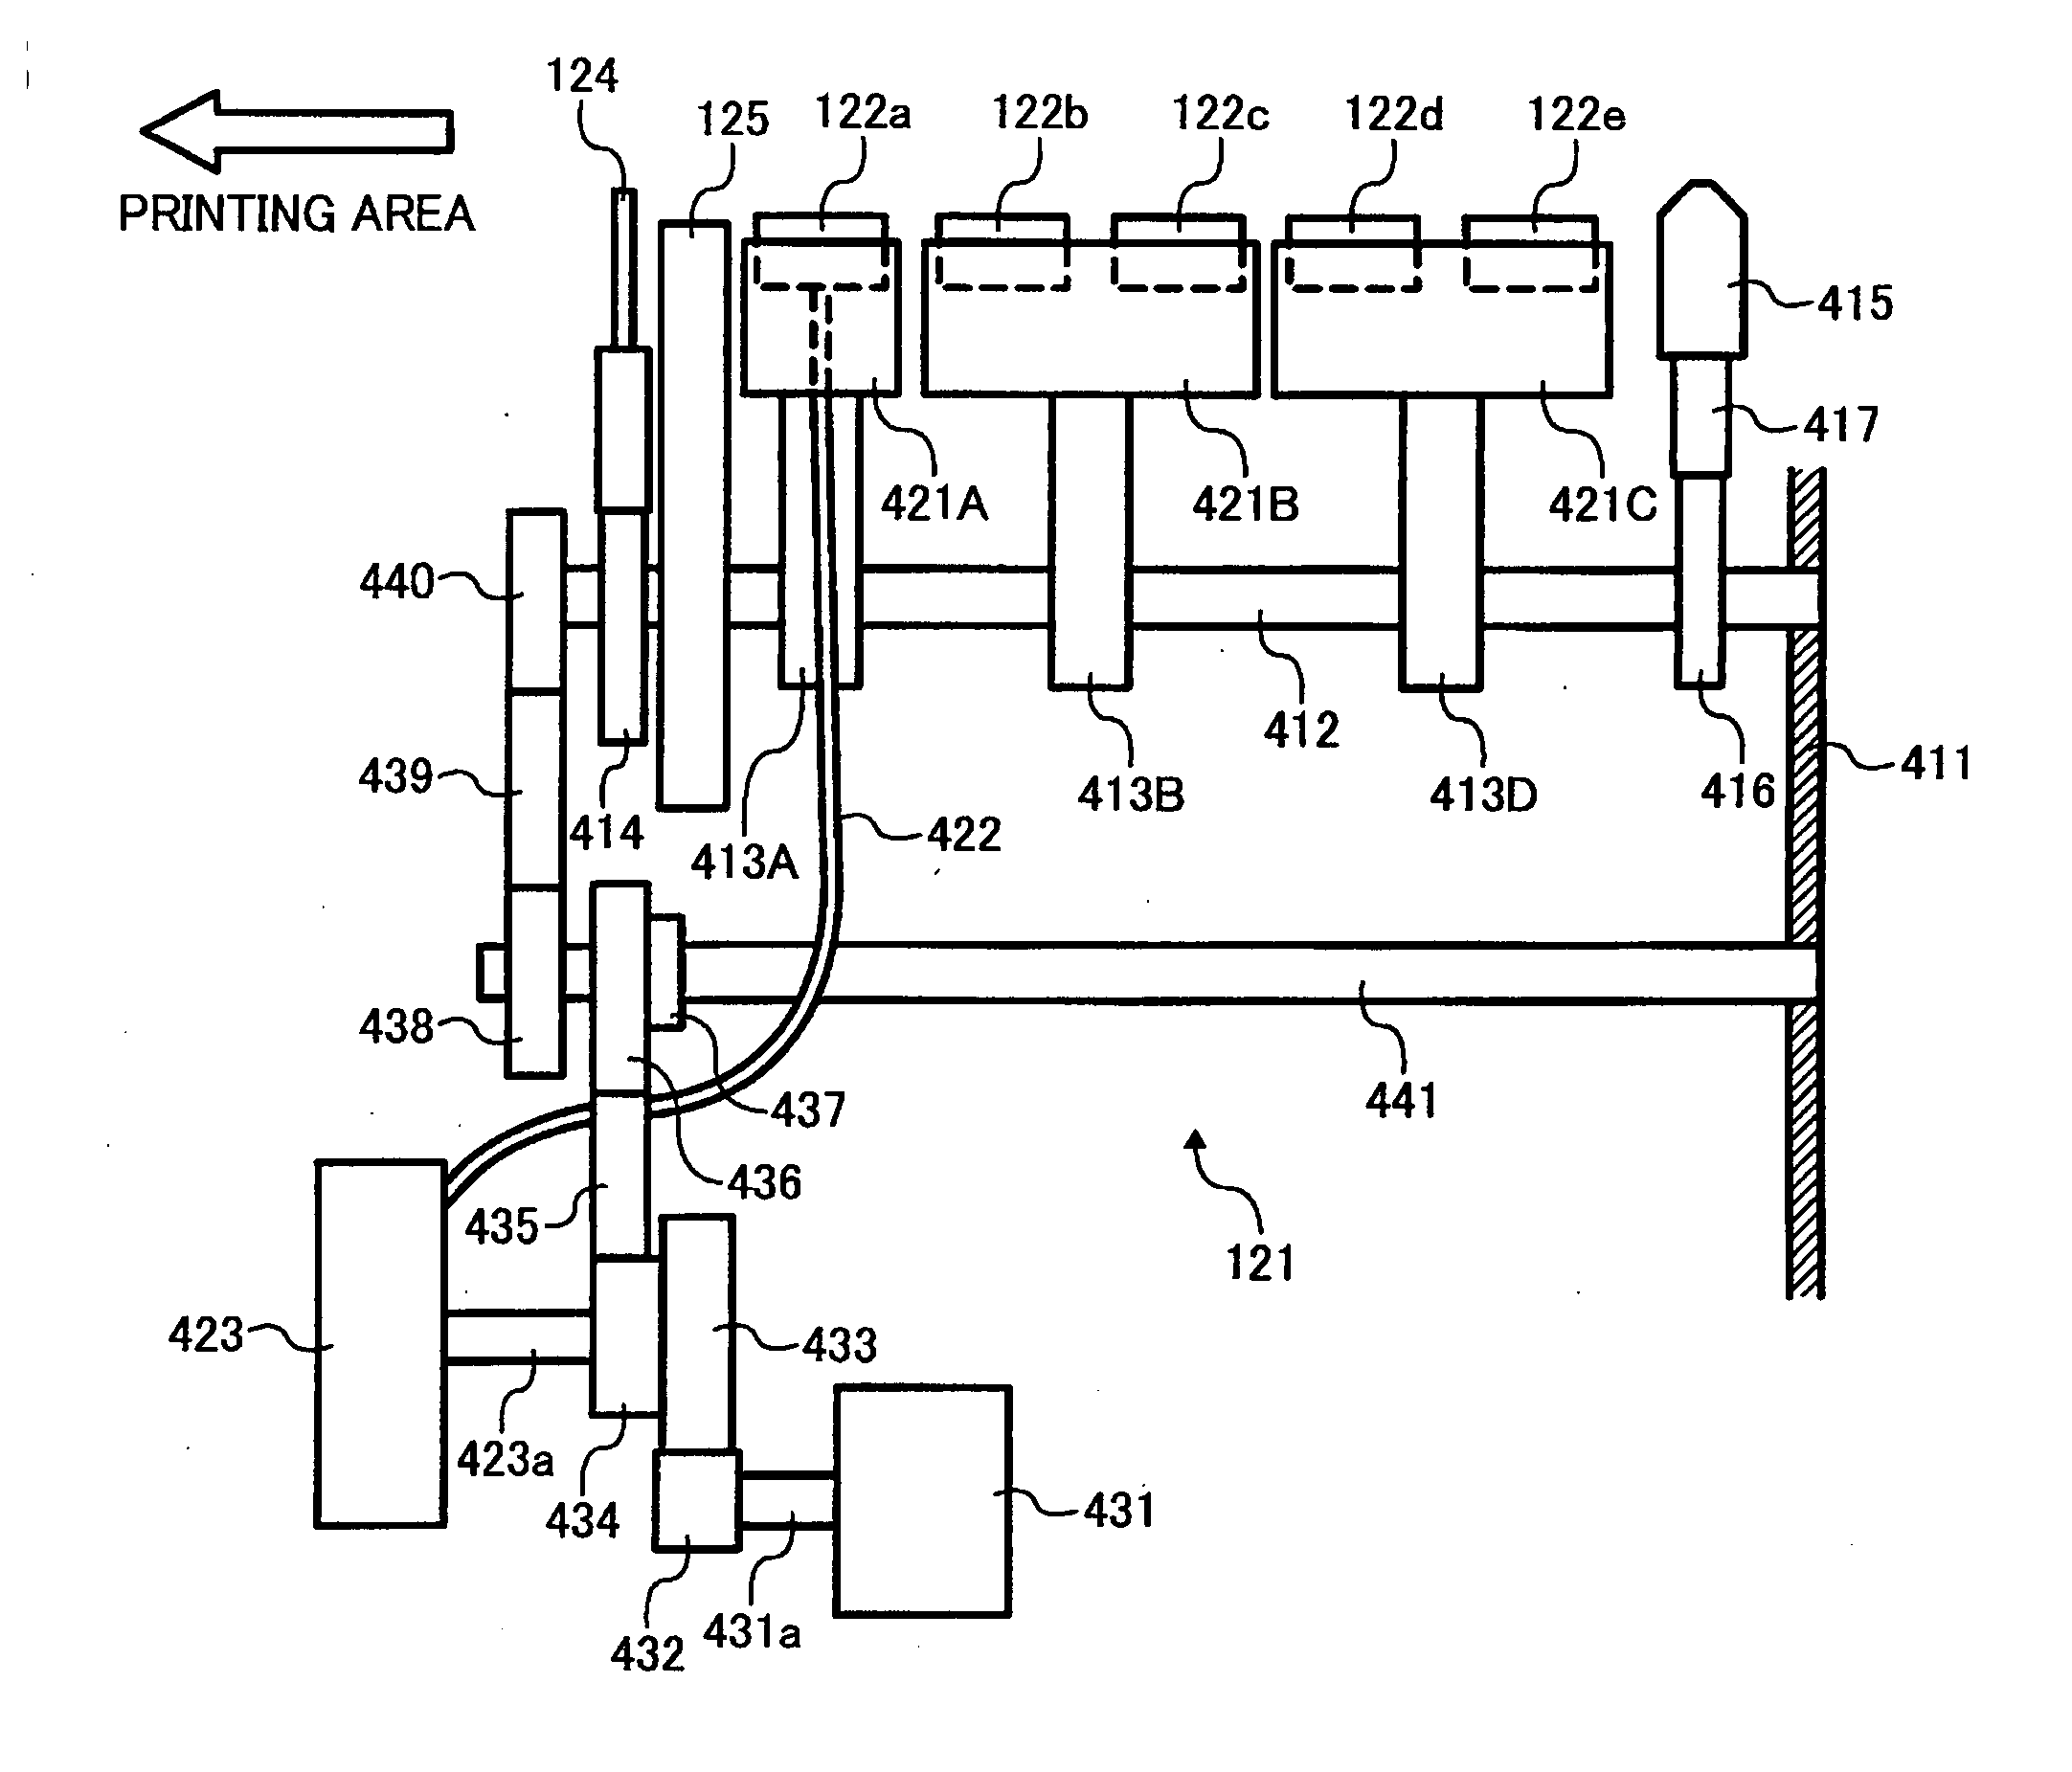 Image forming apparatus using inkjet process capable of maintaining an image forming quality